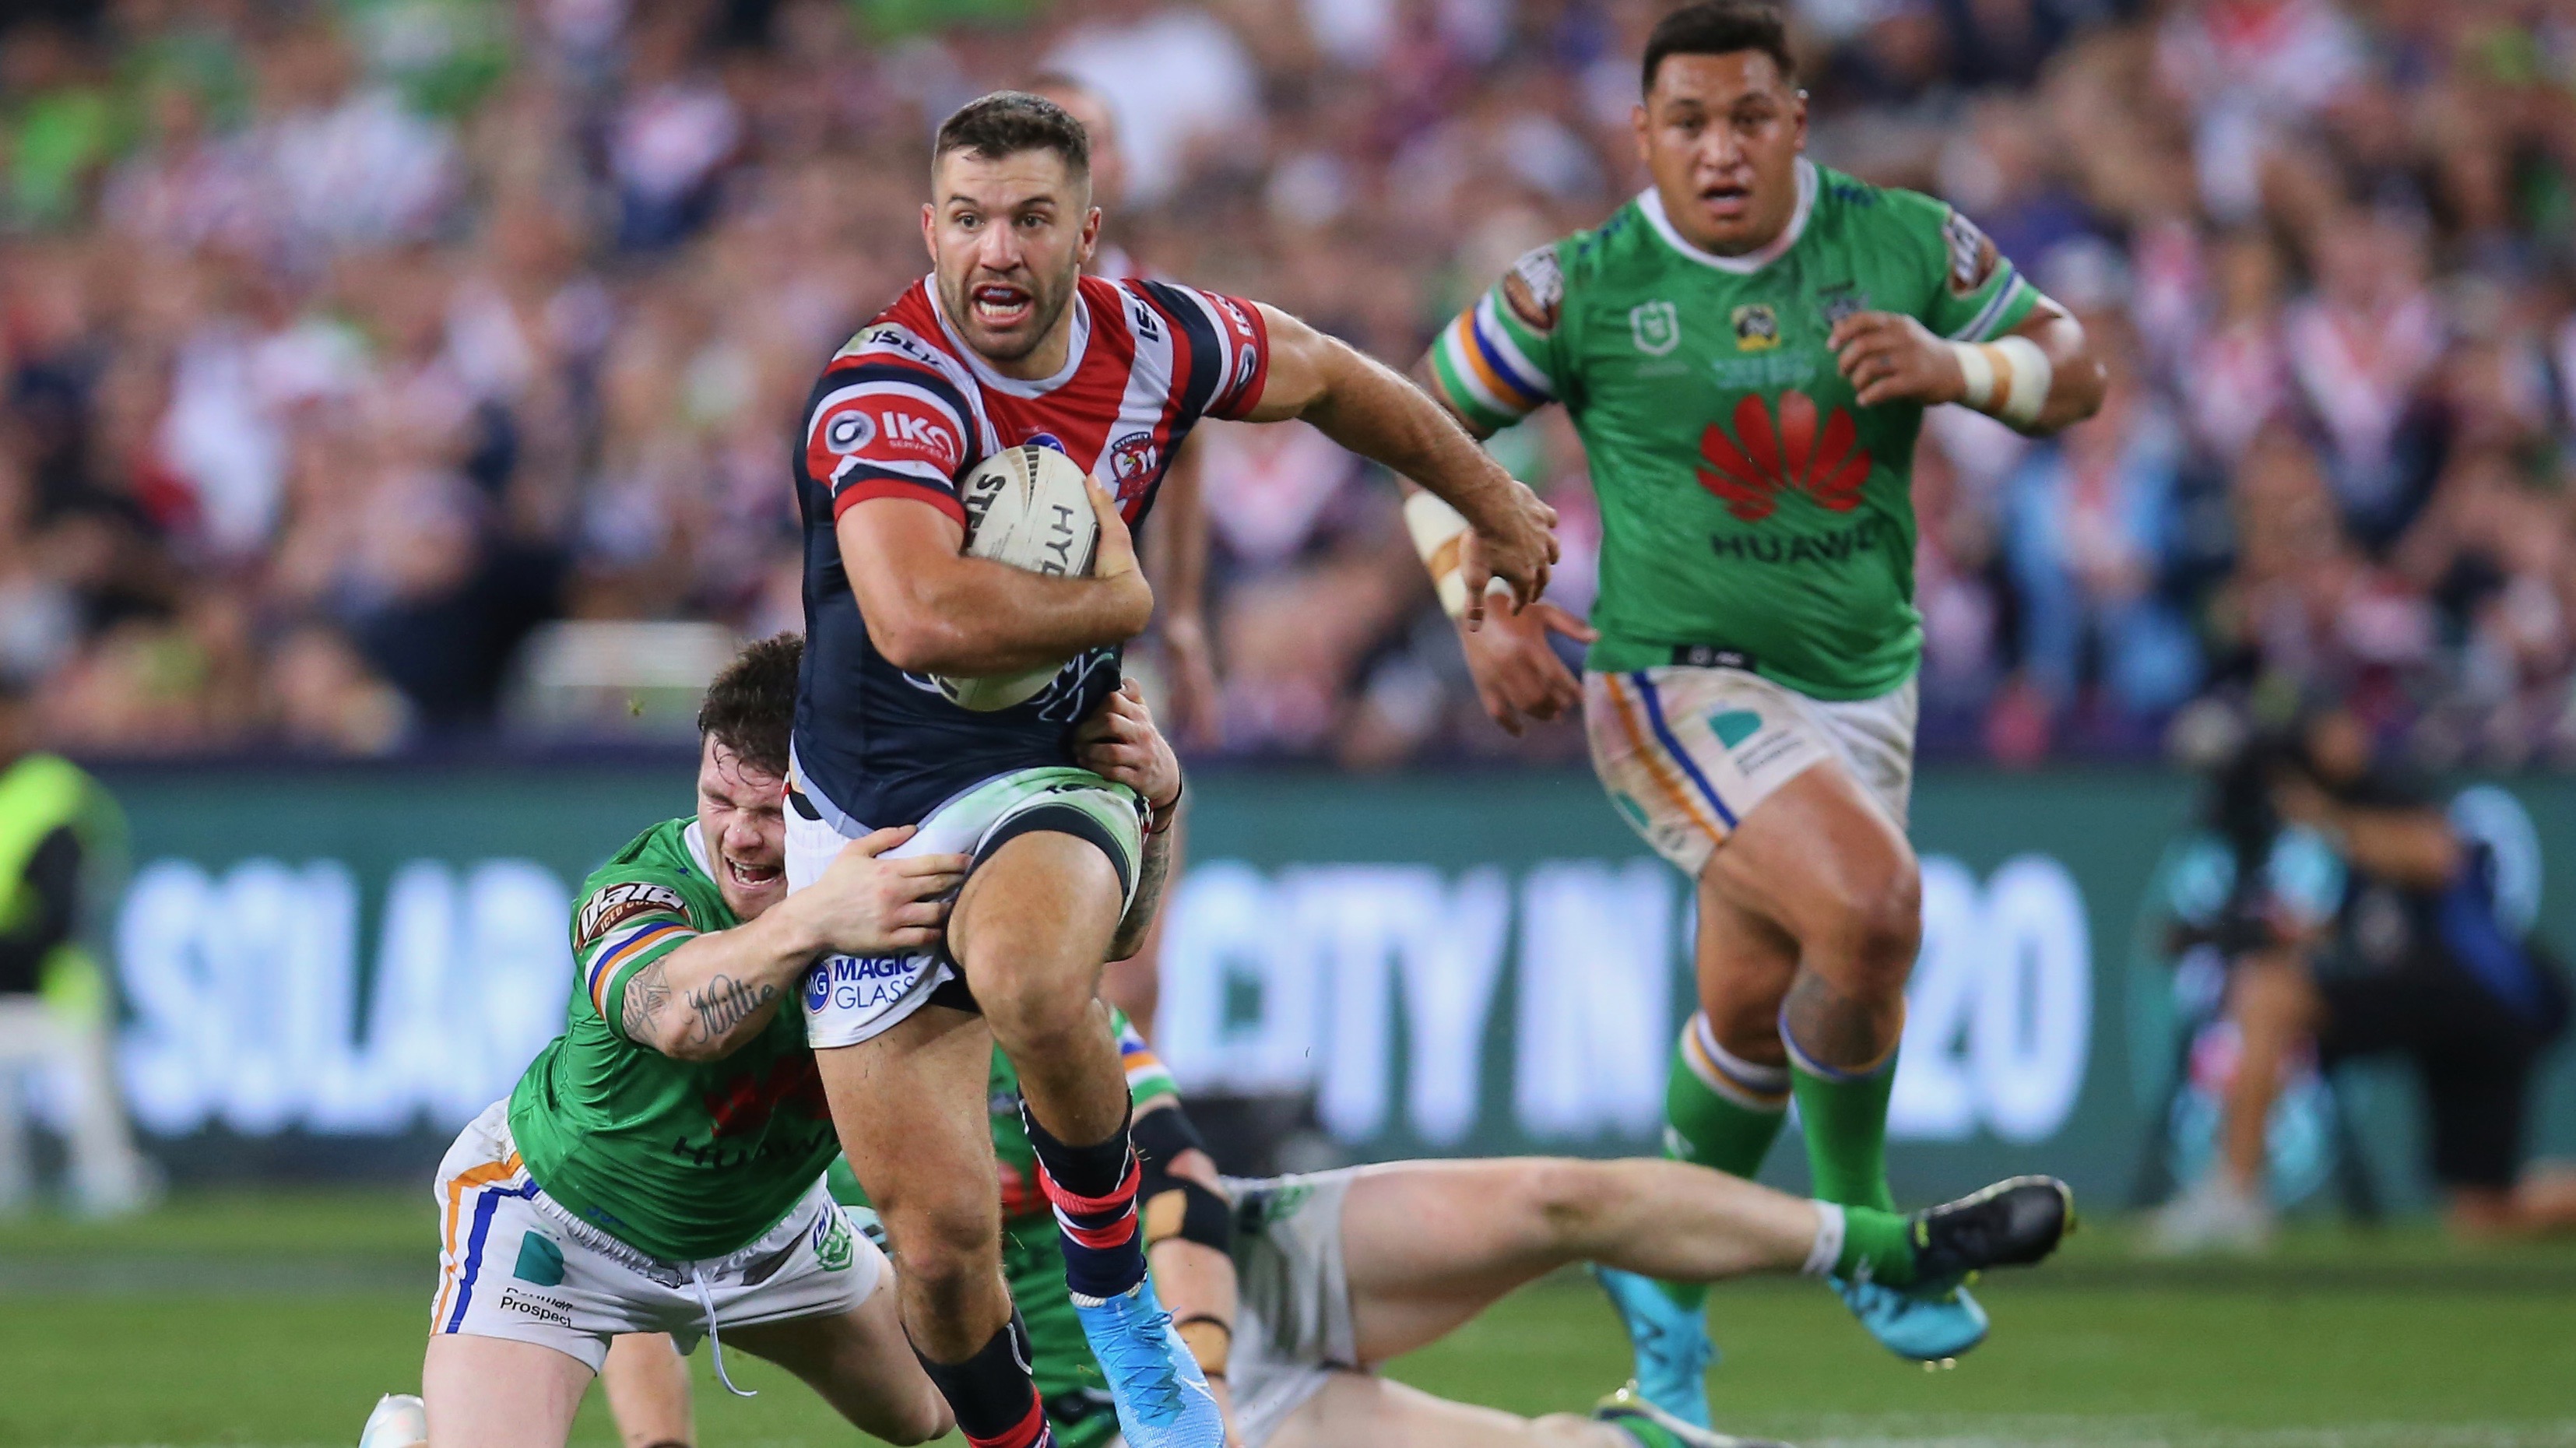 NRL 2020 live stream this year's Rugby League season online in